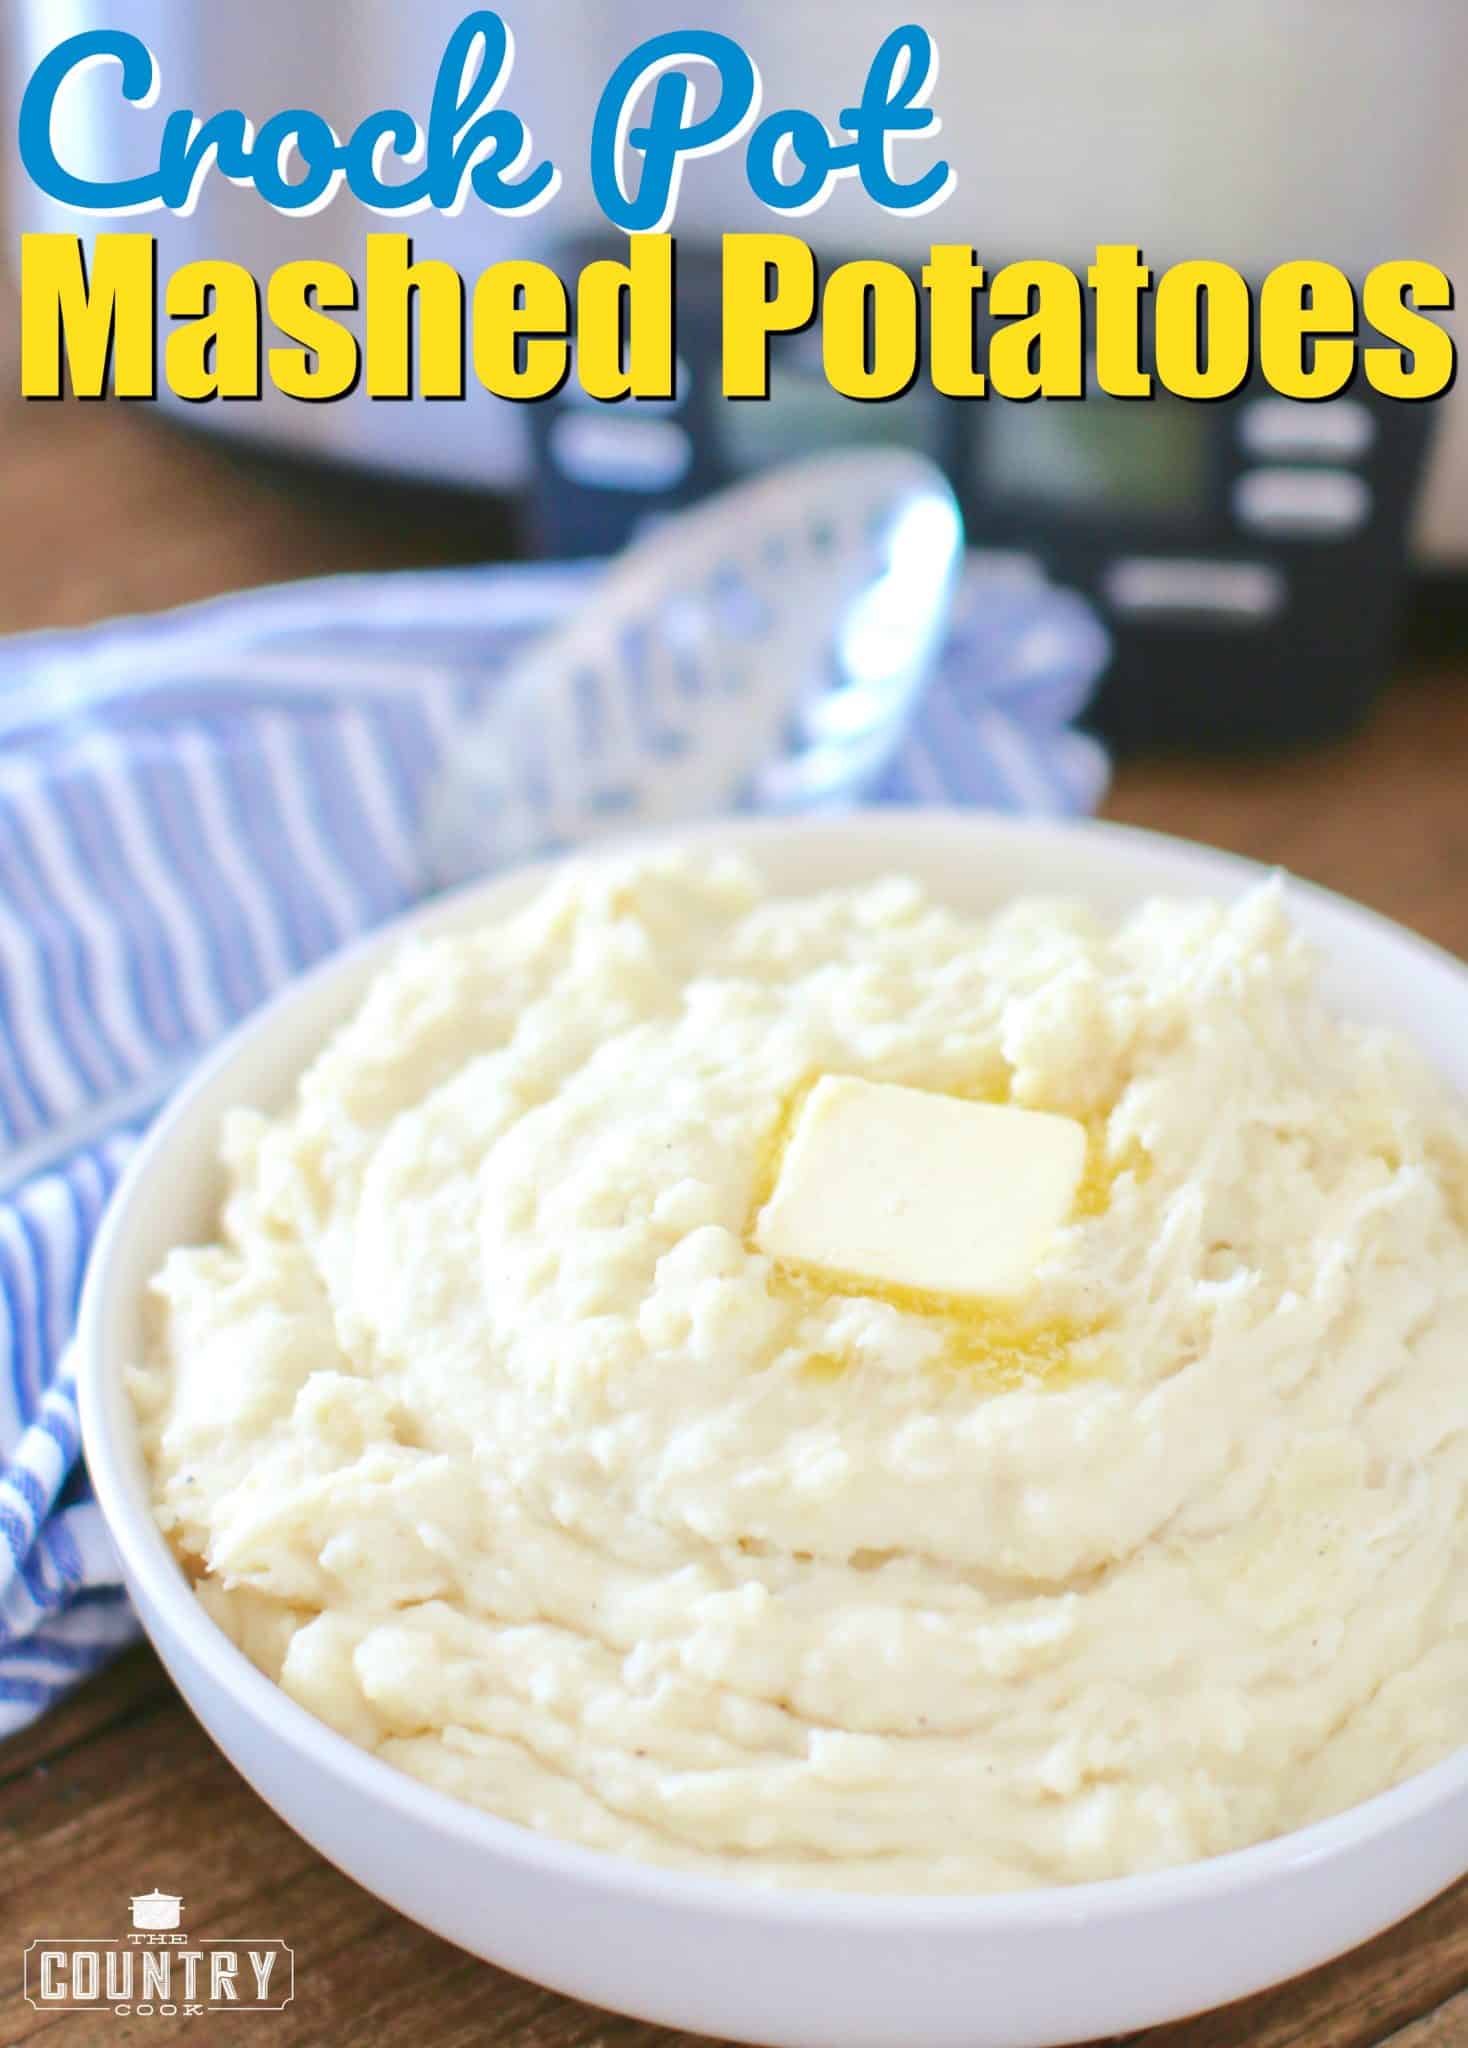 Crock Pot Mashed Potatoes recipe from The Country Cook. Fully cooked mashed potatoes shown with a pat of butter melting on top and displayed in a large white bowl